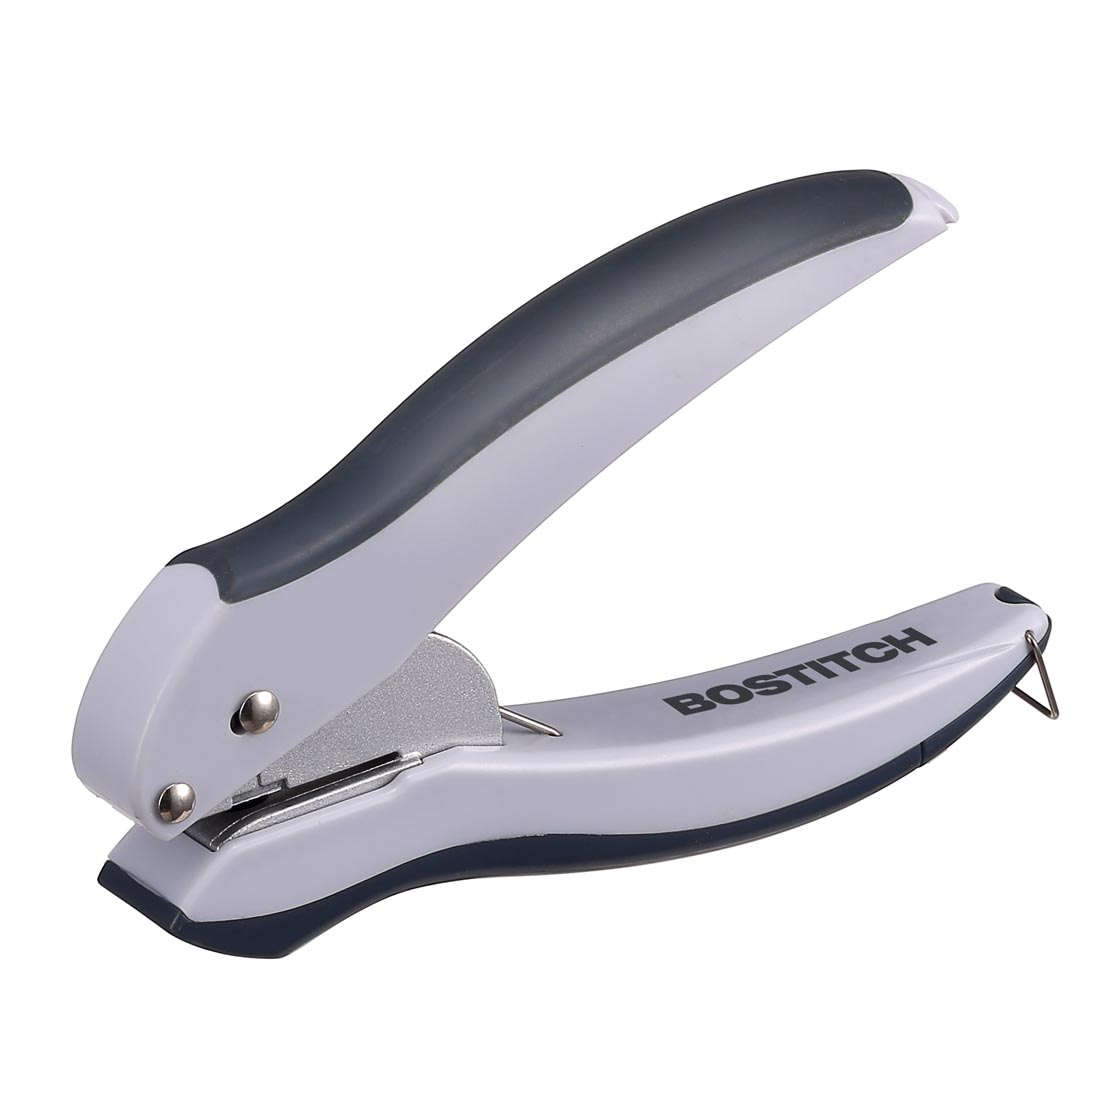 Bostitch EZ Squeeze One-Hole Punch